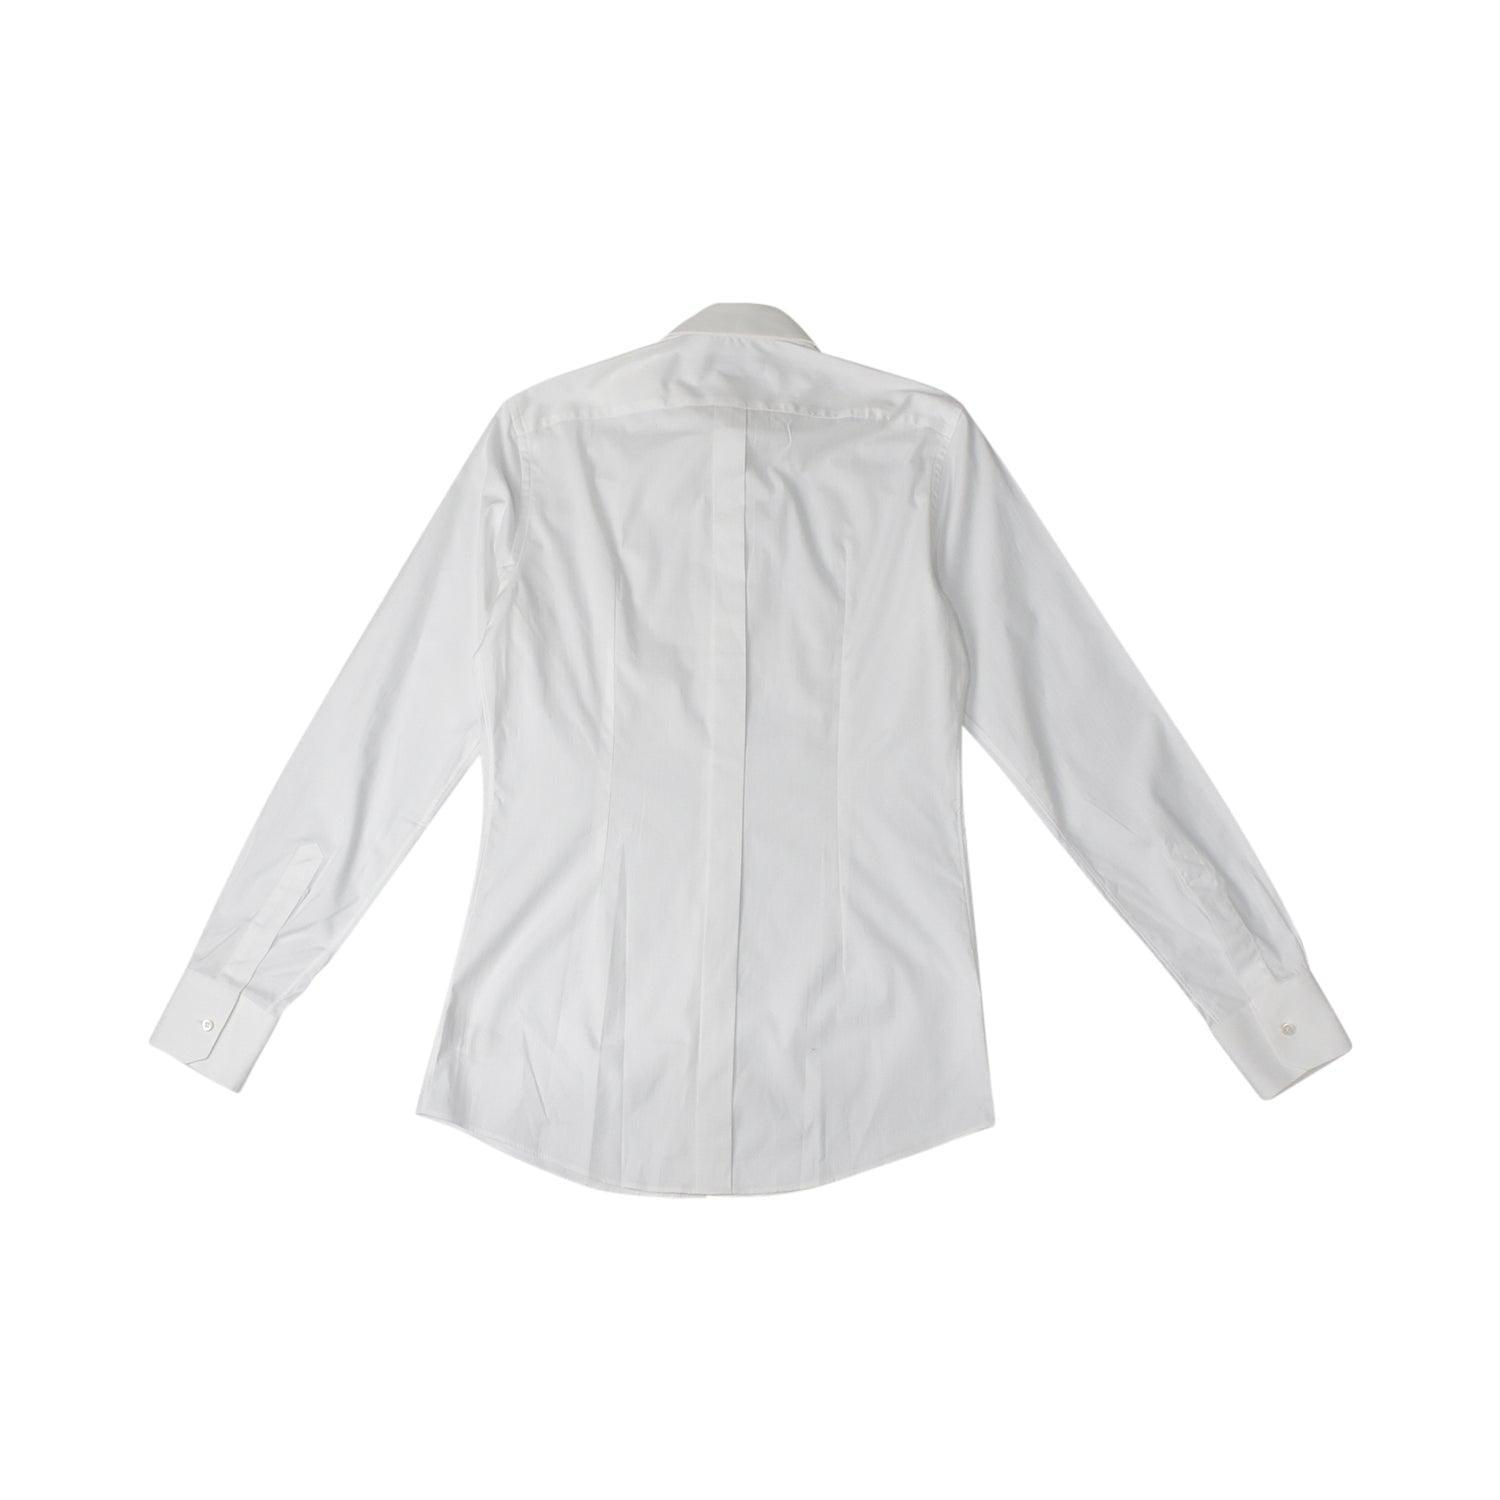 Dolce & Gabbana Button-Down - Men's 39 - Fashionably Yours